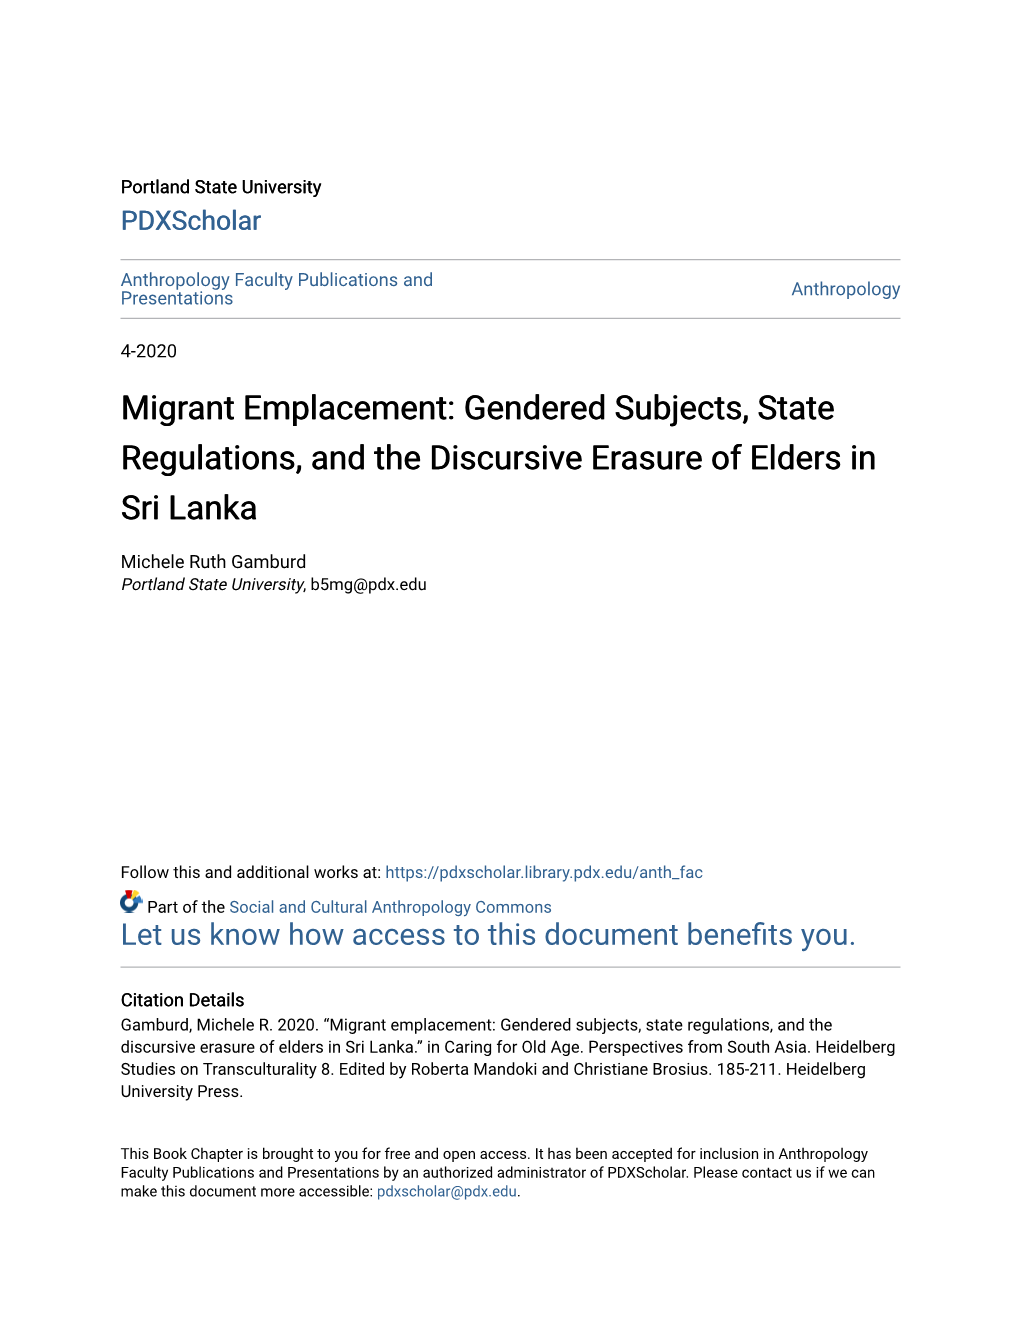 Migrant Emplacement: Gendered Subjects, State Regulations, and the Discursive Erasure of Elders in Sri Lanka